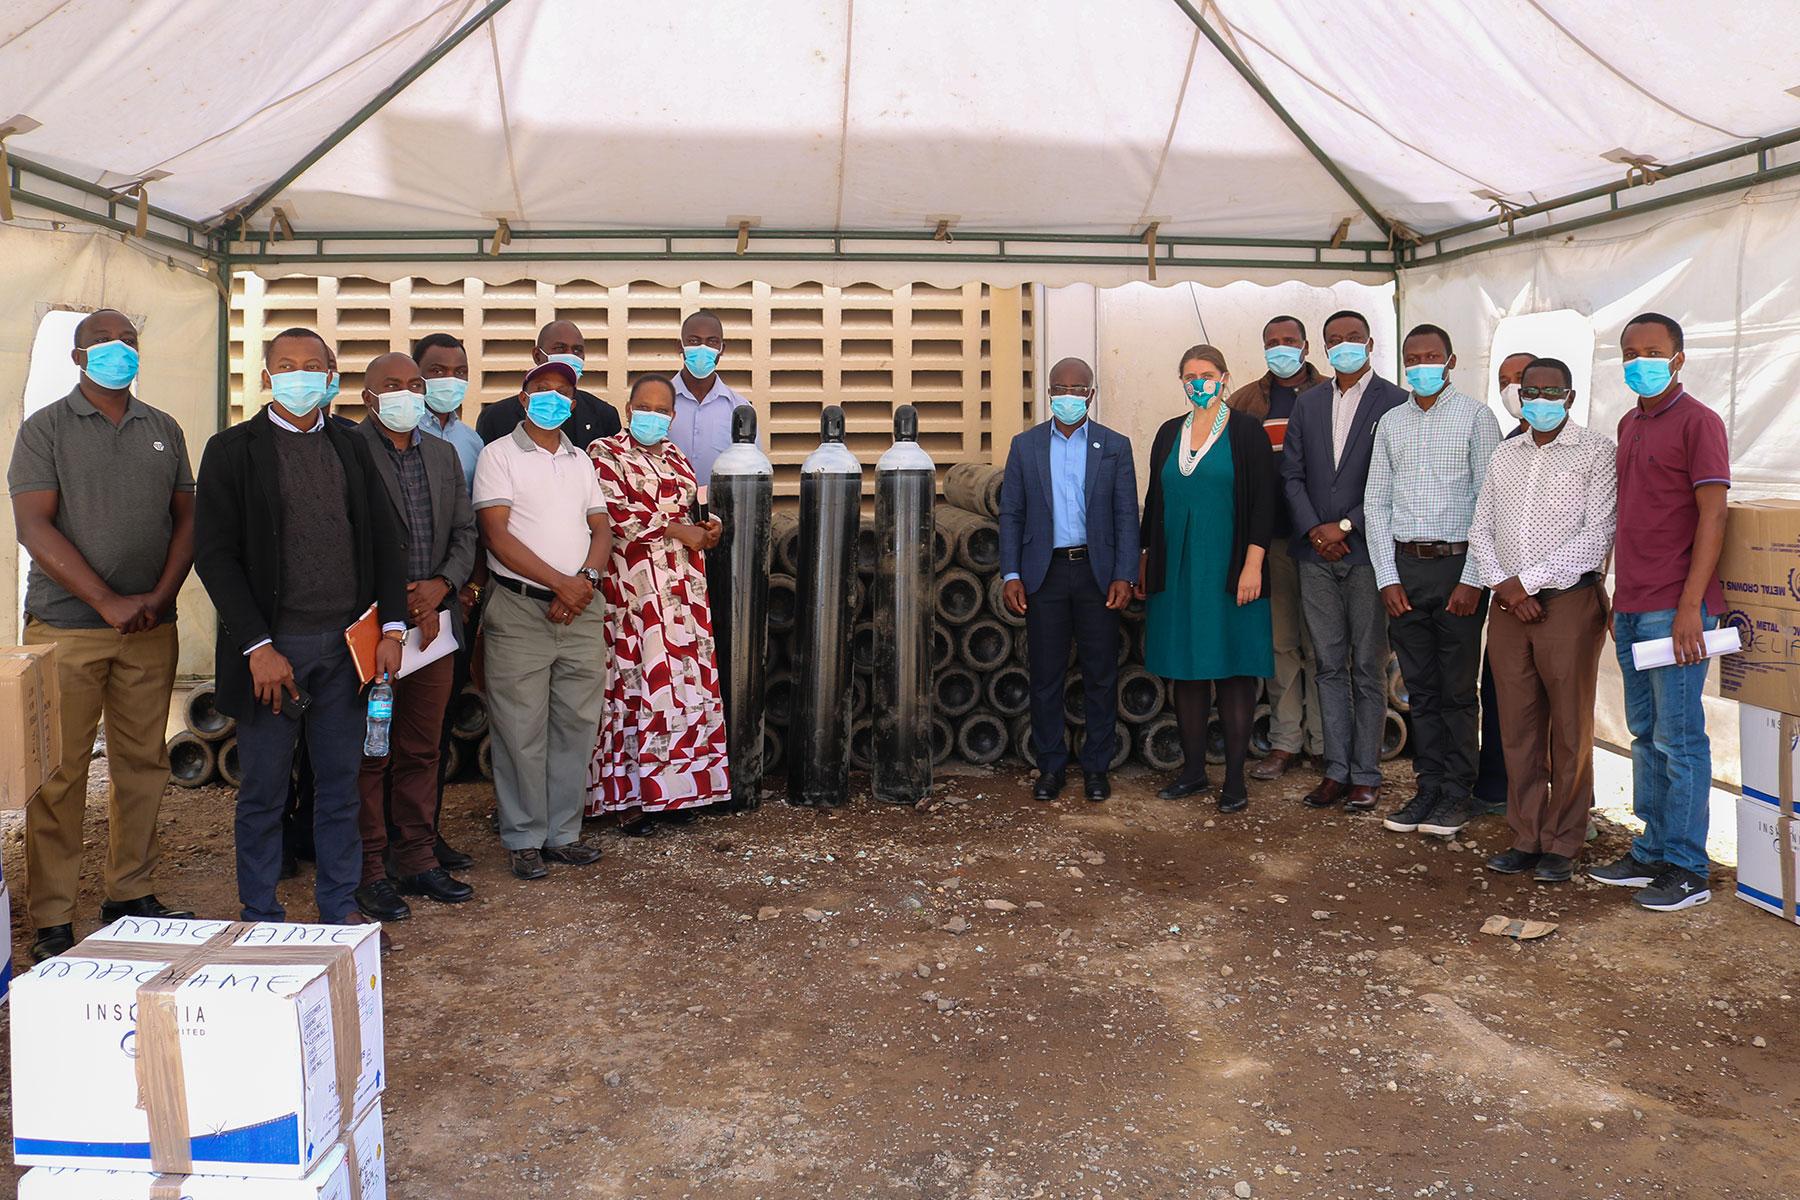 Evangelical Lutheran Church in Tanzania hospitals receive 100 oxygen cylinders and Personal Protective Equipment from the Lutheran Mission Cooperation (LMC) to help meet demand. Erick K. Adolph/ELCT